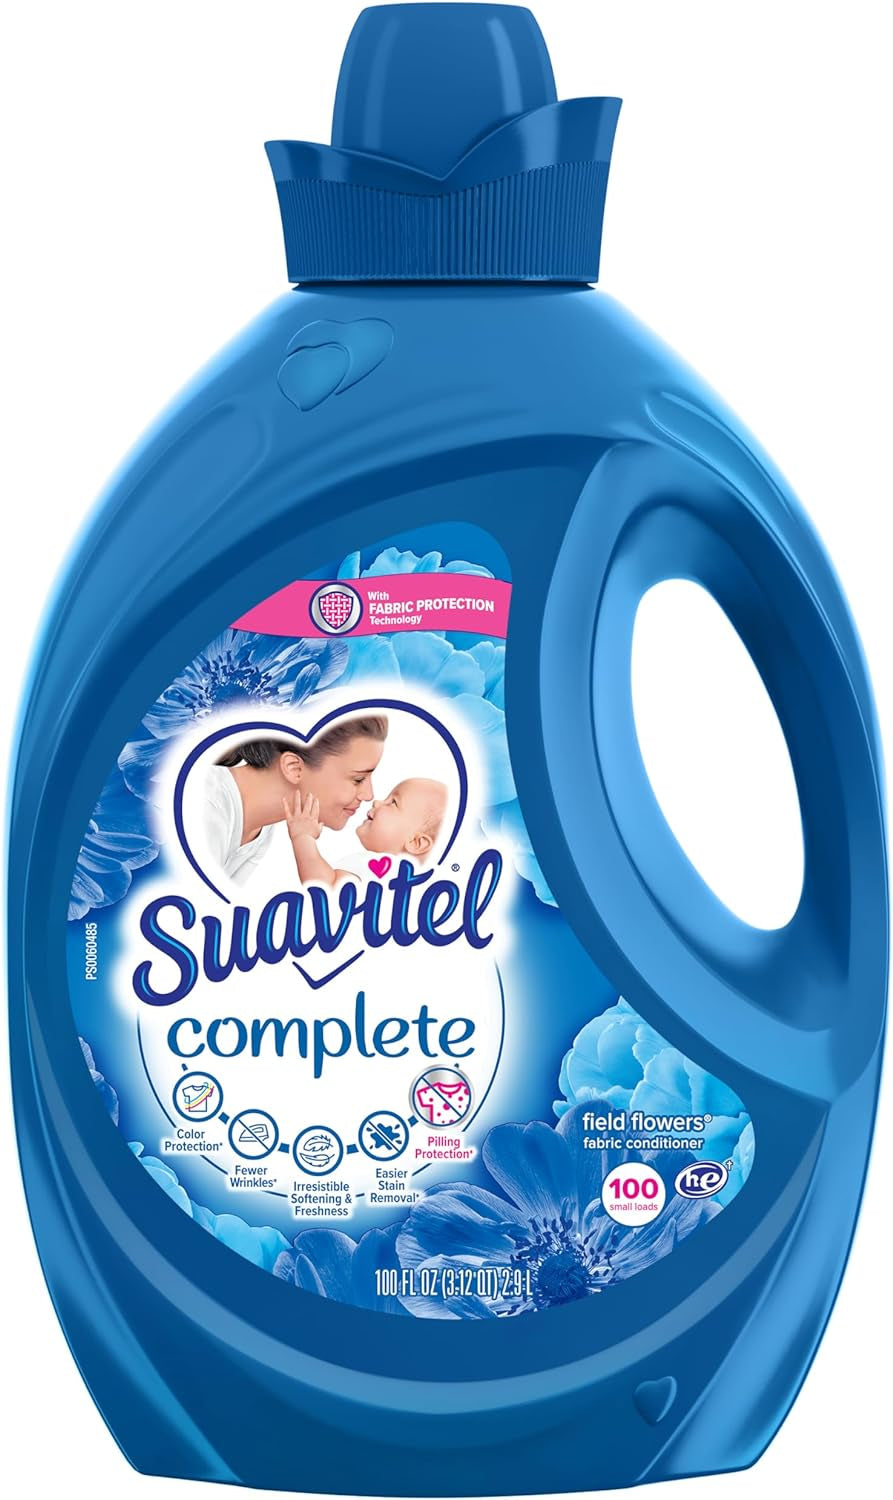 Complete Liquid Fabric Conditioner, Laundry Fabric Softener with Fabric Protection Technology, Field Flowers, 100 Oz, Enough Liquid for 100 Small Loads